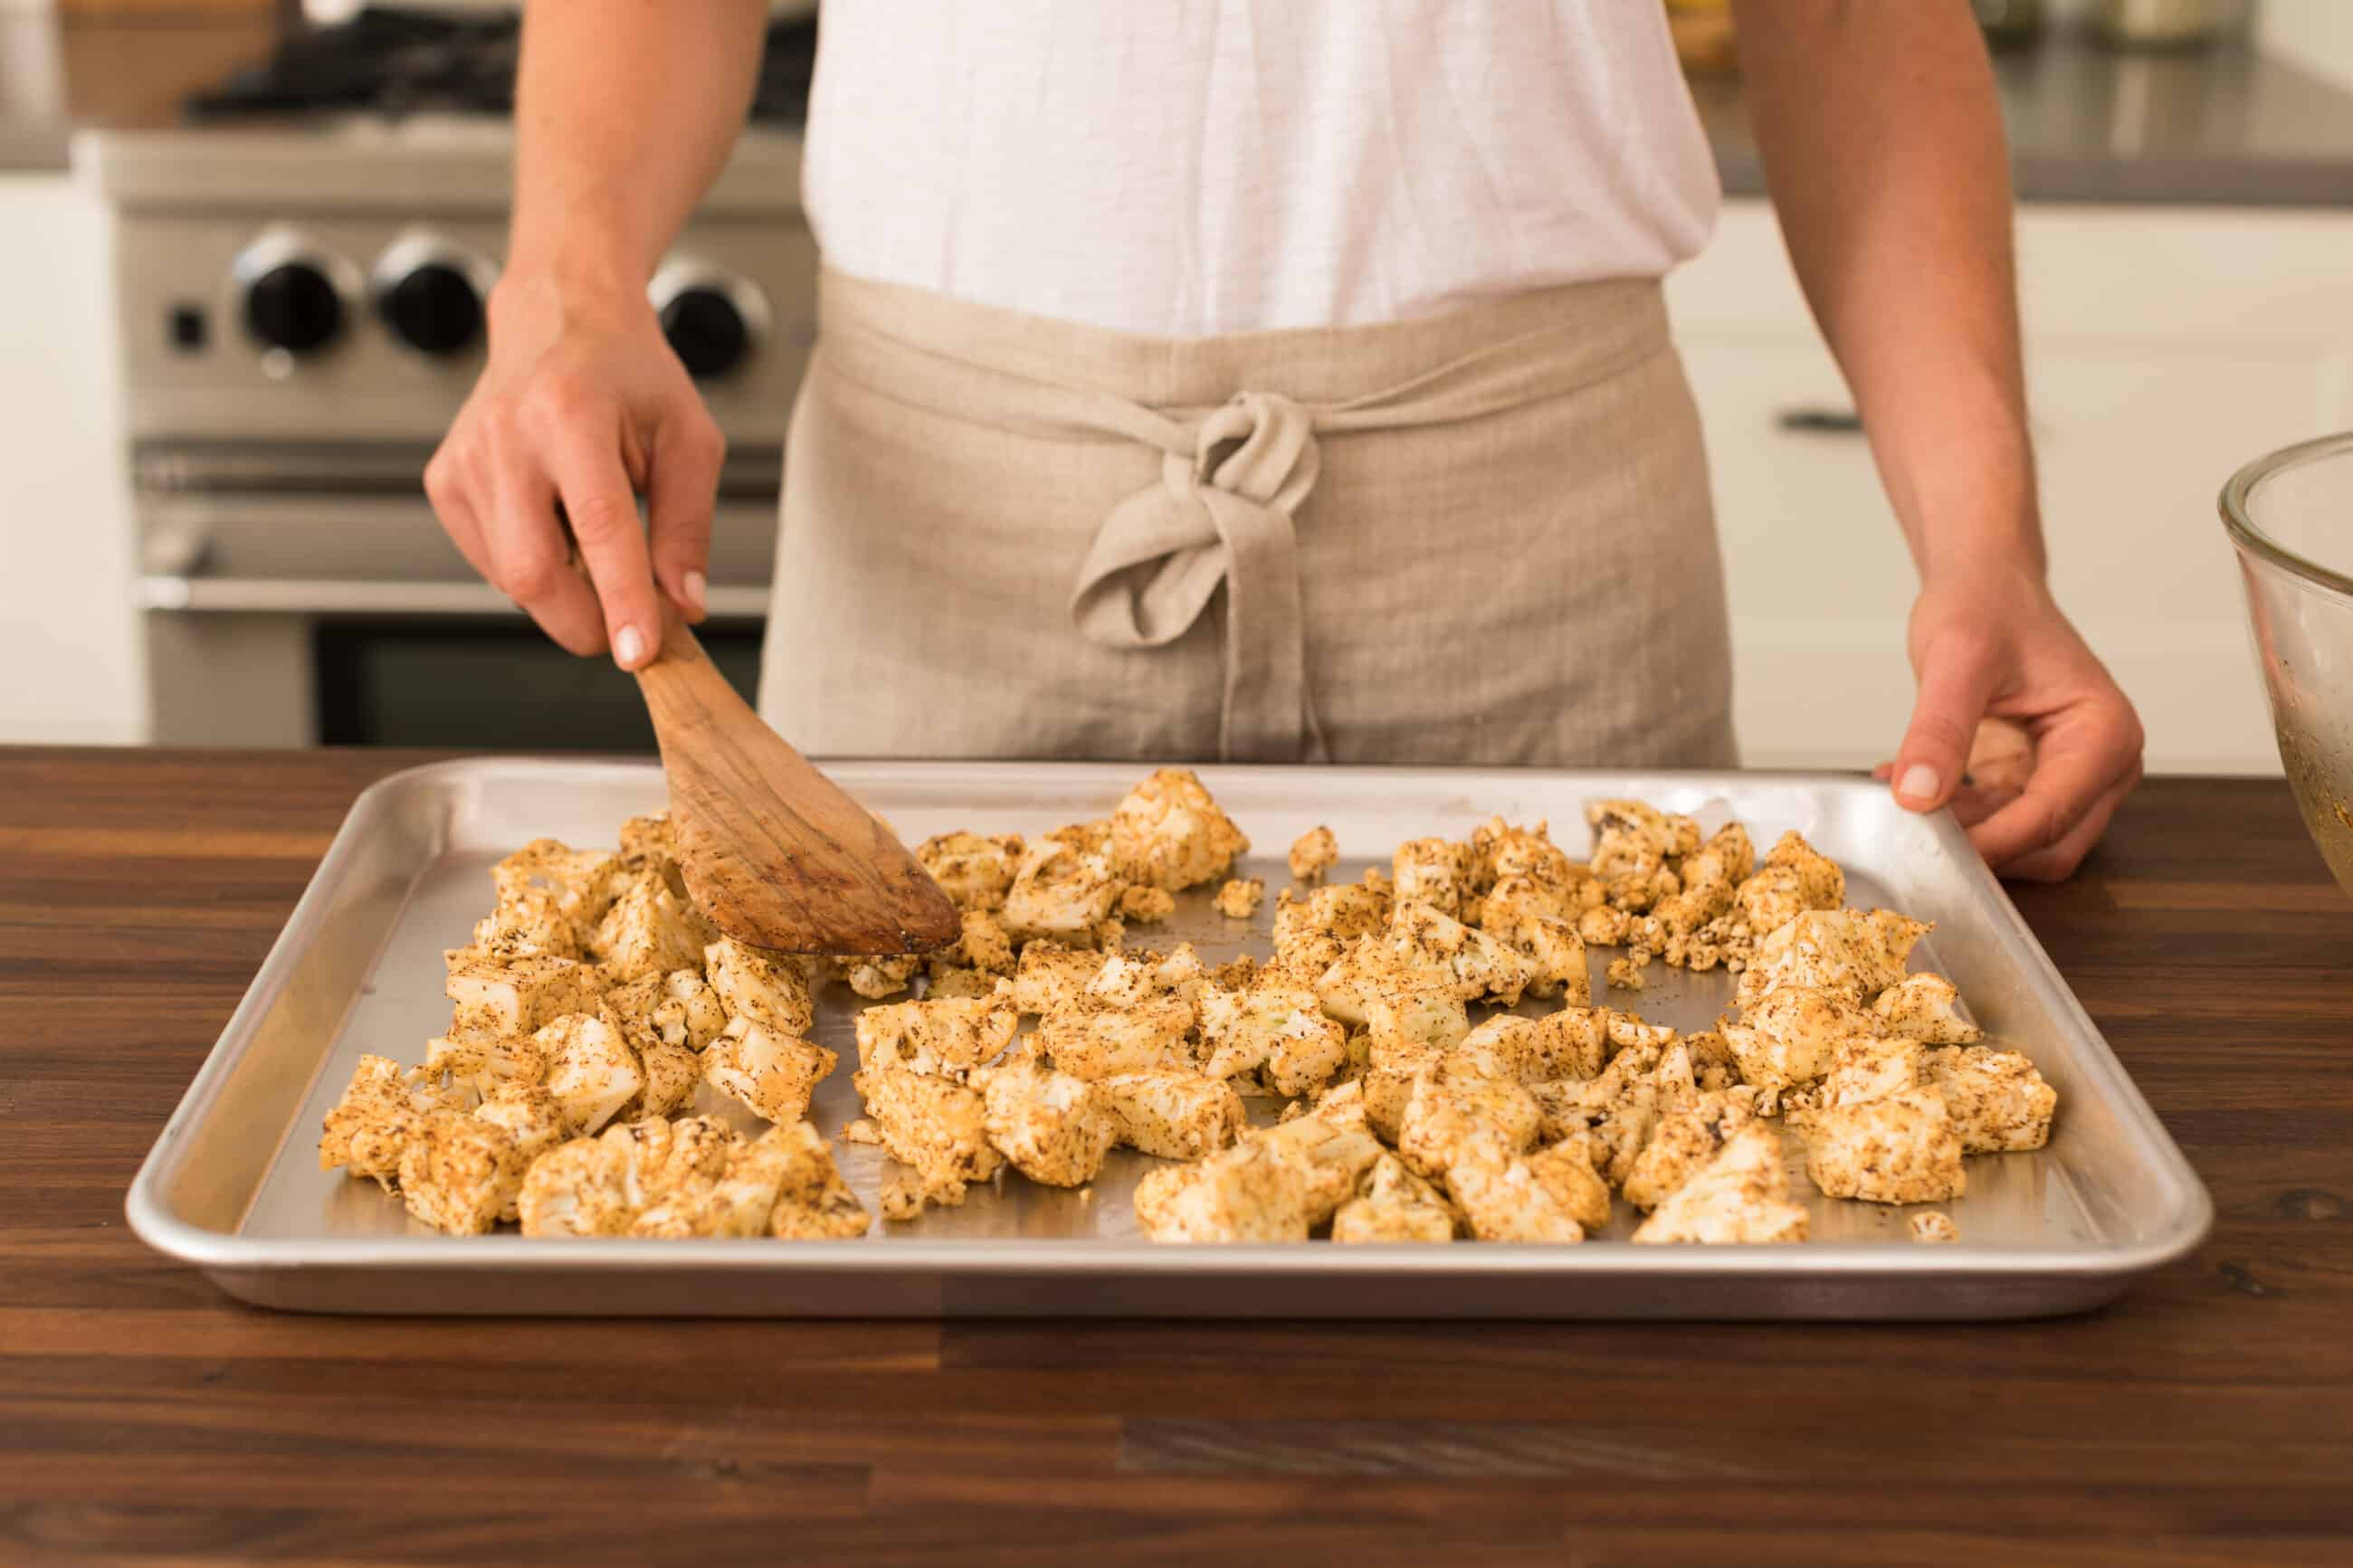 Play cauliflower in a single layer onto a baking pan